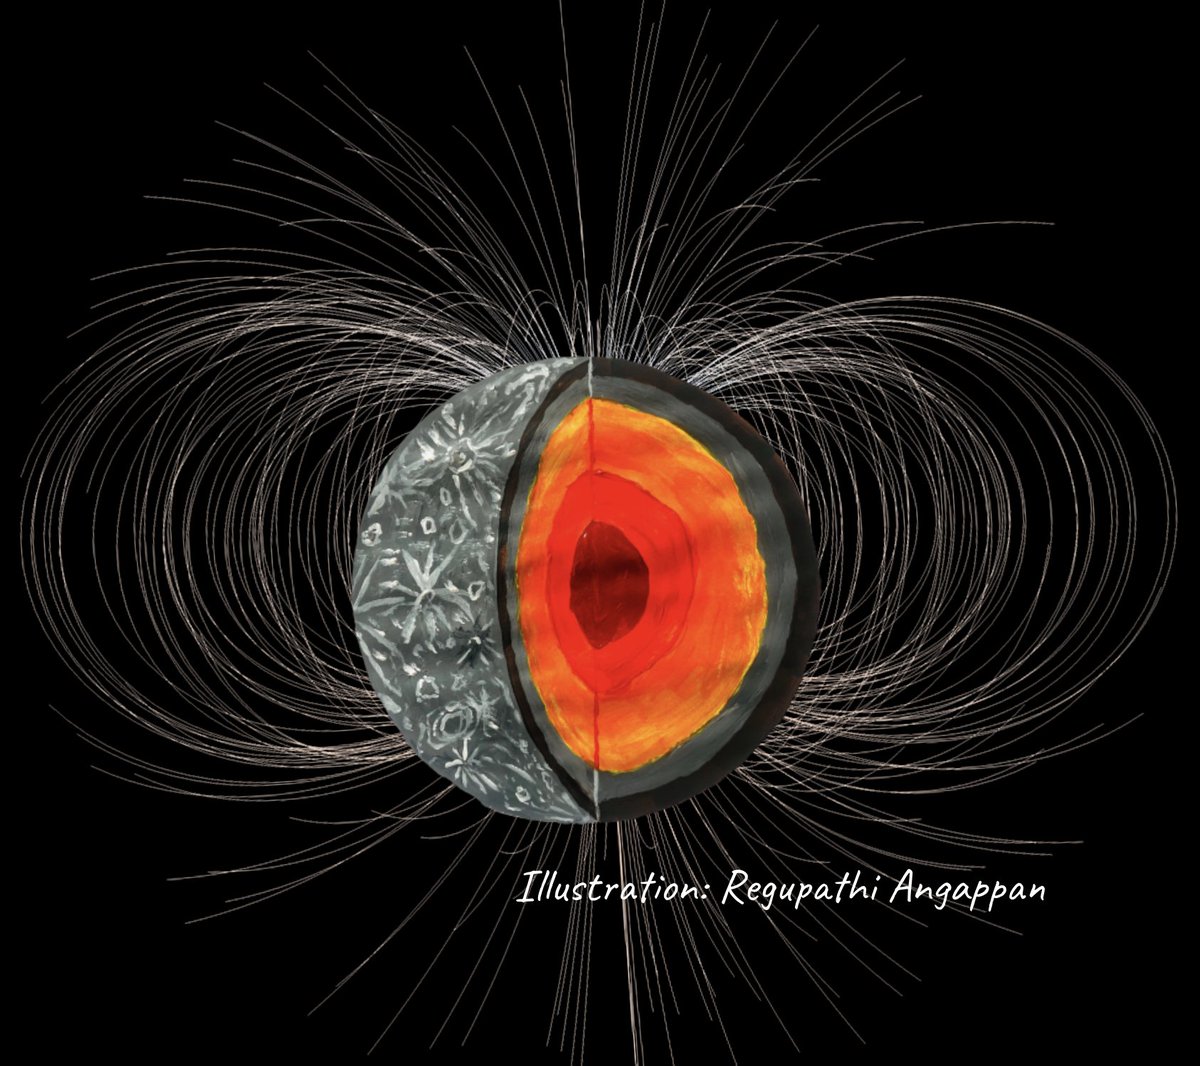 Its  #AGU20 time! So here is a illustrated thread of my AGU presentation:  #tistheseason  #Science  #planets  #scicomm Let's talk ...  #Mercury, its  #MagneticField, & its  #Magnetosphere (magnetic environment).  @AGUMagnetism (thread: 1/13)